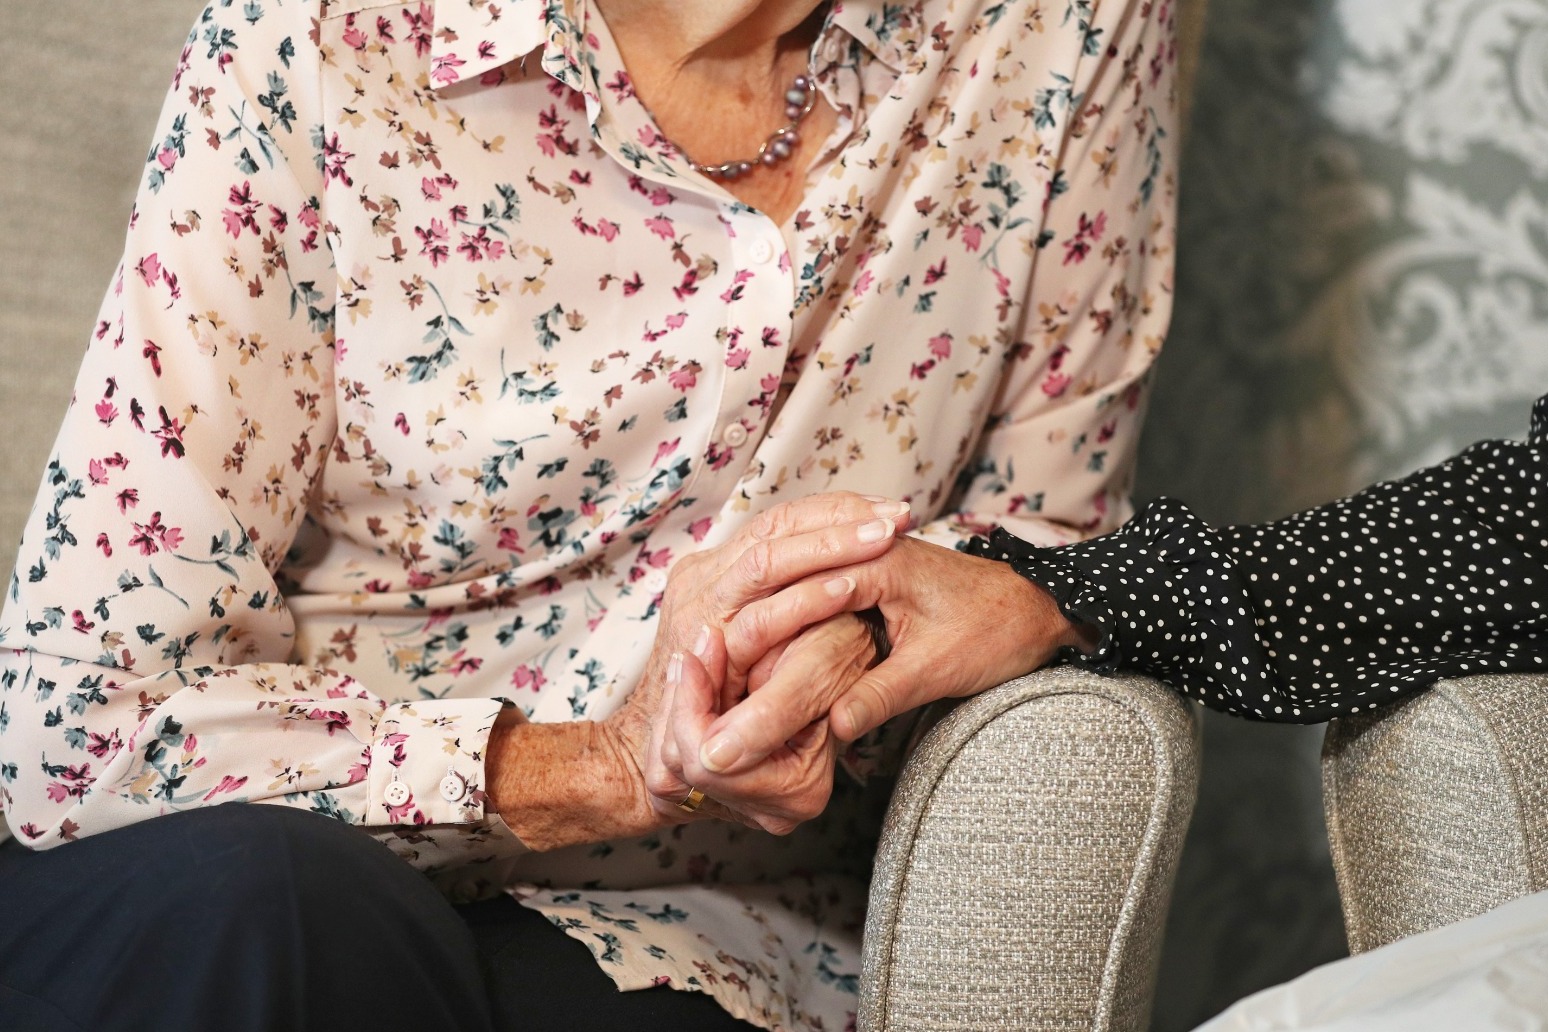 New figures reveal the number of care workers in England has fallen for the first time 